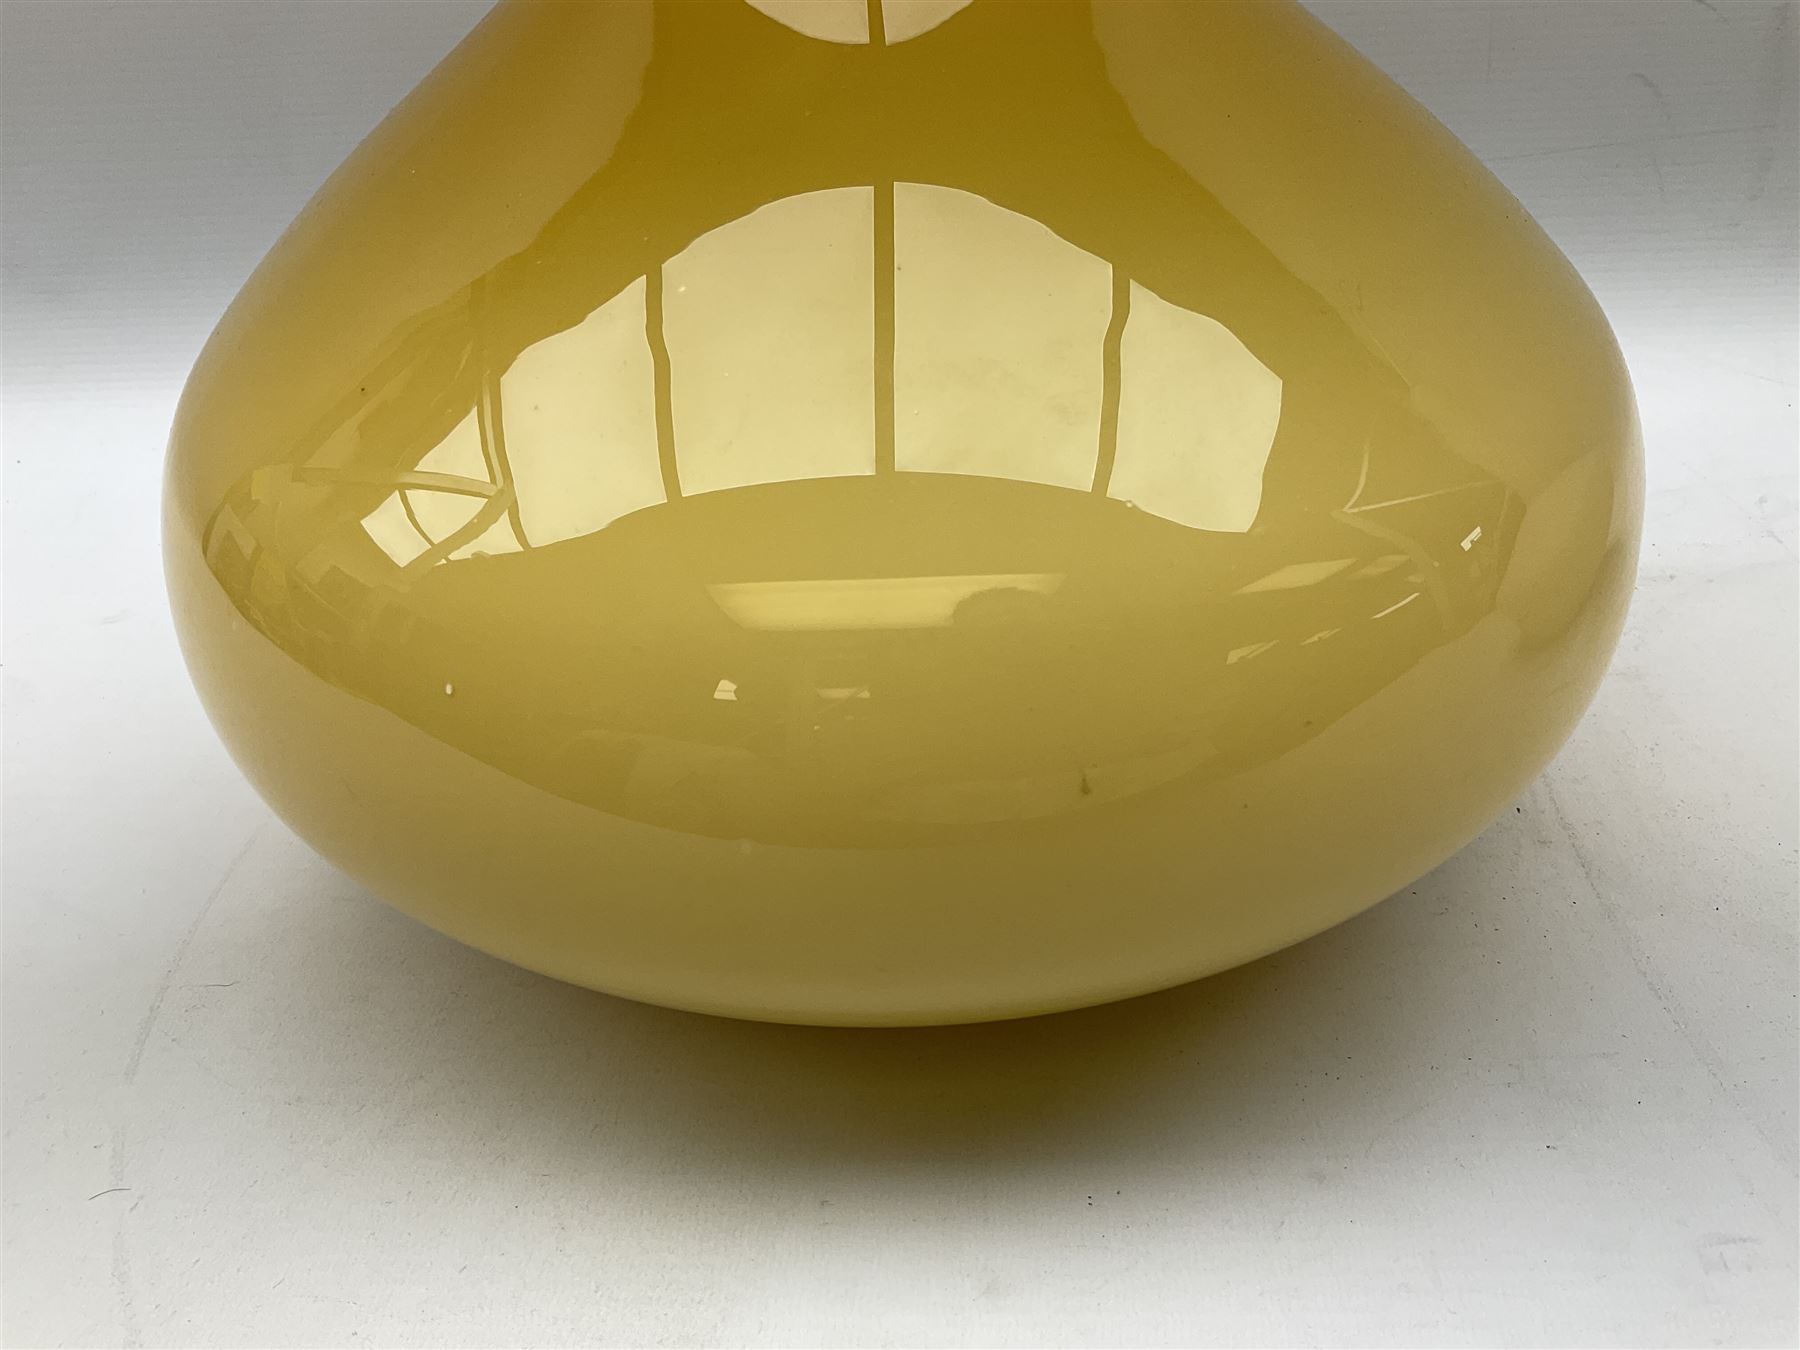 1960s butterscotch art glass light shade of conical form with teak collar - Image 4 of 7